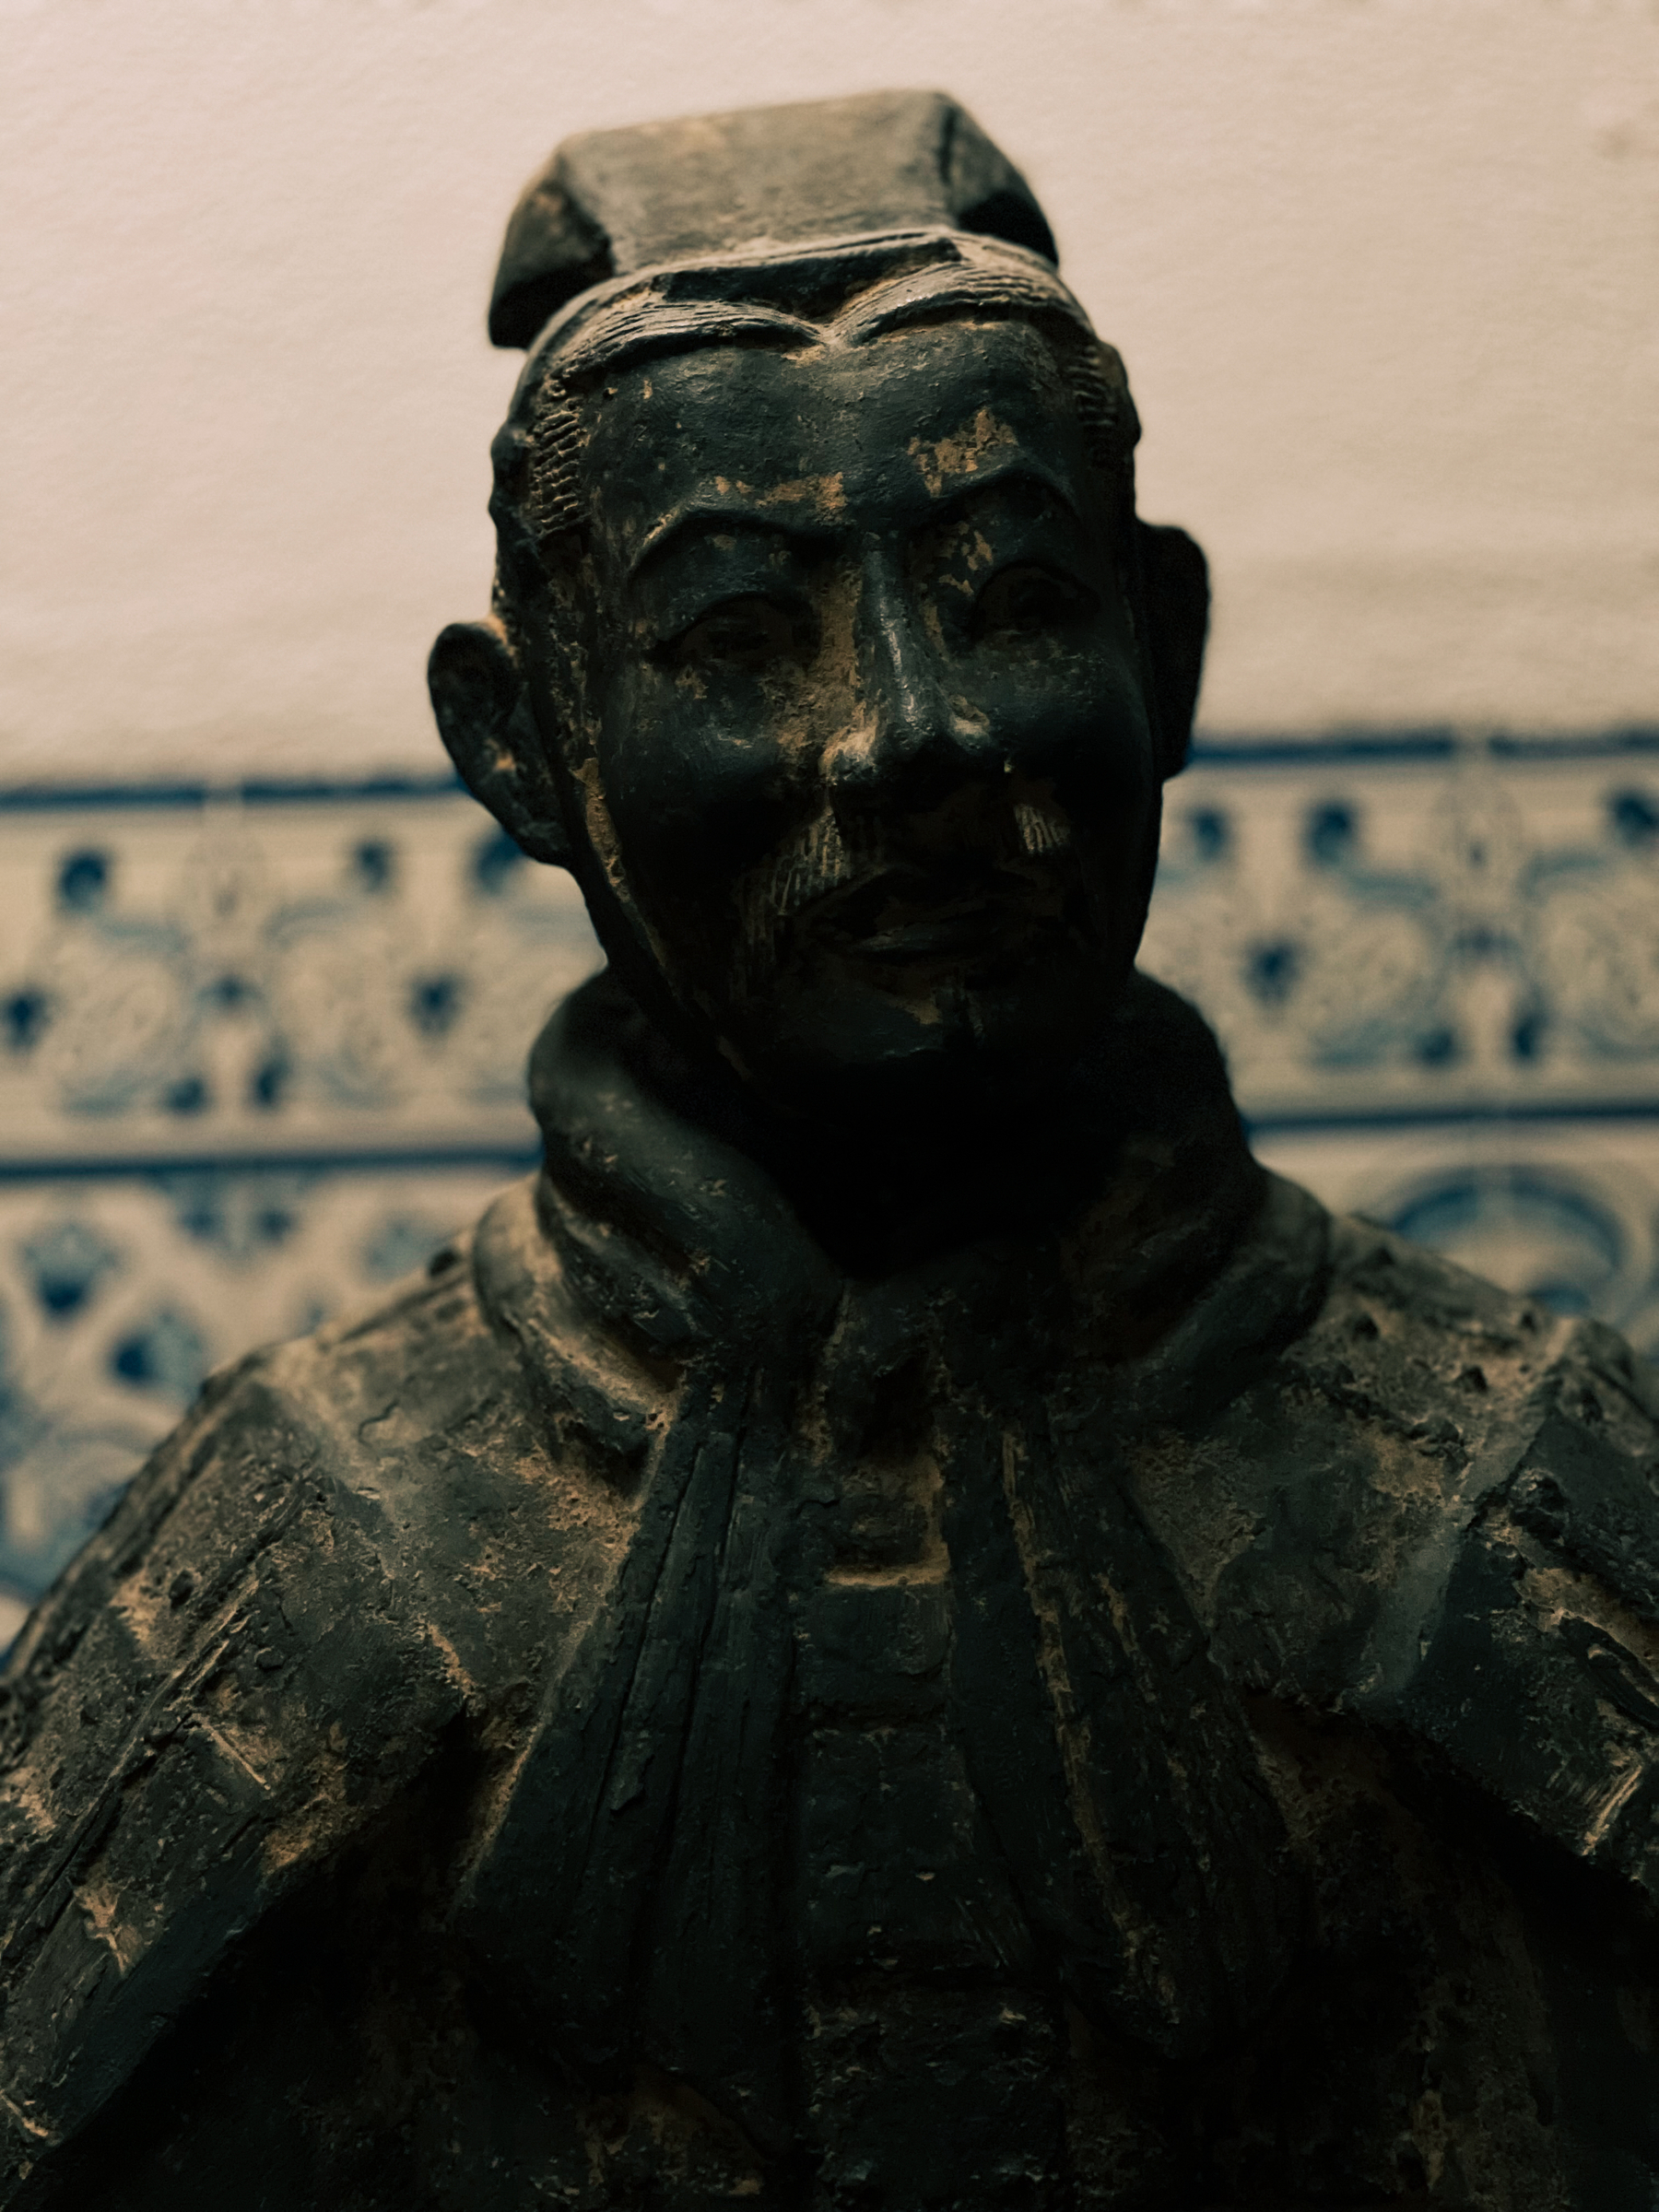 Chinese sculpture in a museum.